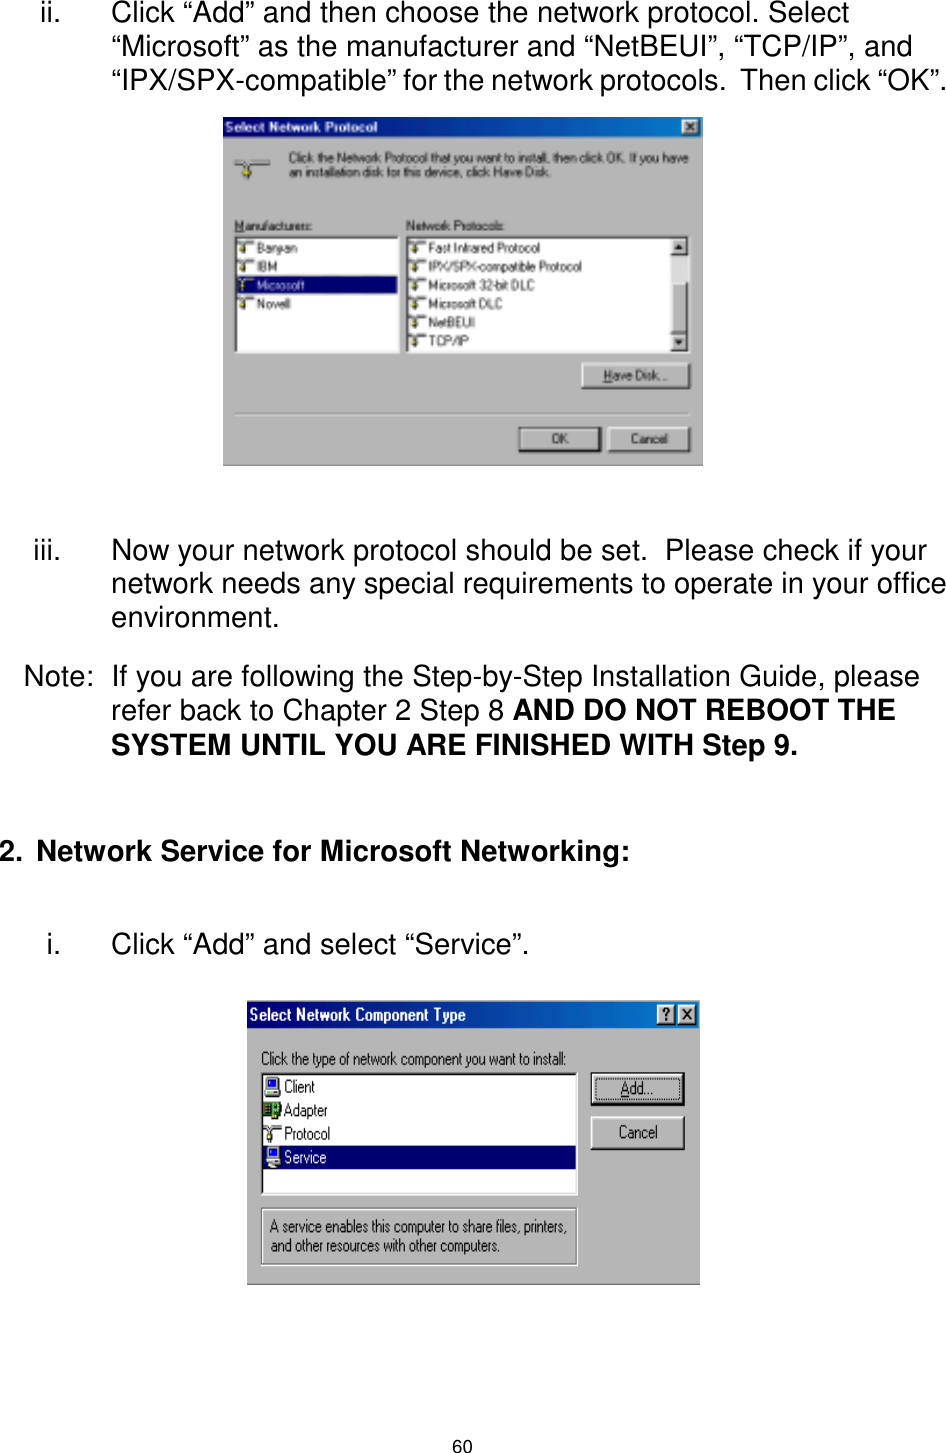  60 ii.  Click “Add” and then choose the network protocol. Select “Microsoft” as the manufacturer and “NetBEUI”, “TCP/IP”, and “IPX/SPX-compatible” for the network protocols.  Then click “OK”.        iii.  Now your network protocol should be set.  Please check if your network needs any special requirements to operate in your office environment. Note:  If you are following the Step-by-Step Installation Guide, please refer back to Chapter 2 Step 8 AND DO NOT REBOOT THE SYSTEM UNTIL YOU ARE FINISHED WITH Step 9.  2.  Network Service for Microsoft Networking:  i.  Click “Add” and select “Service”.        